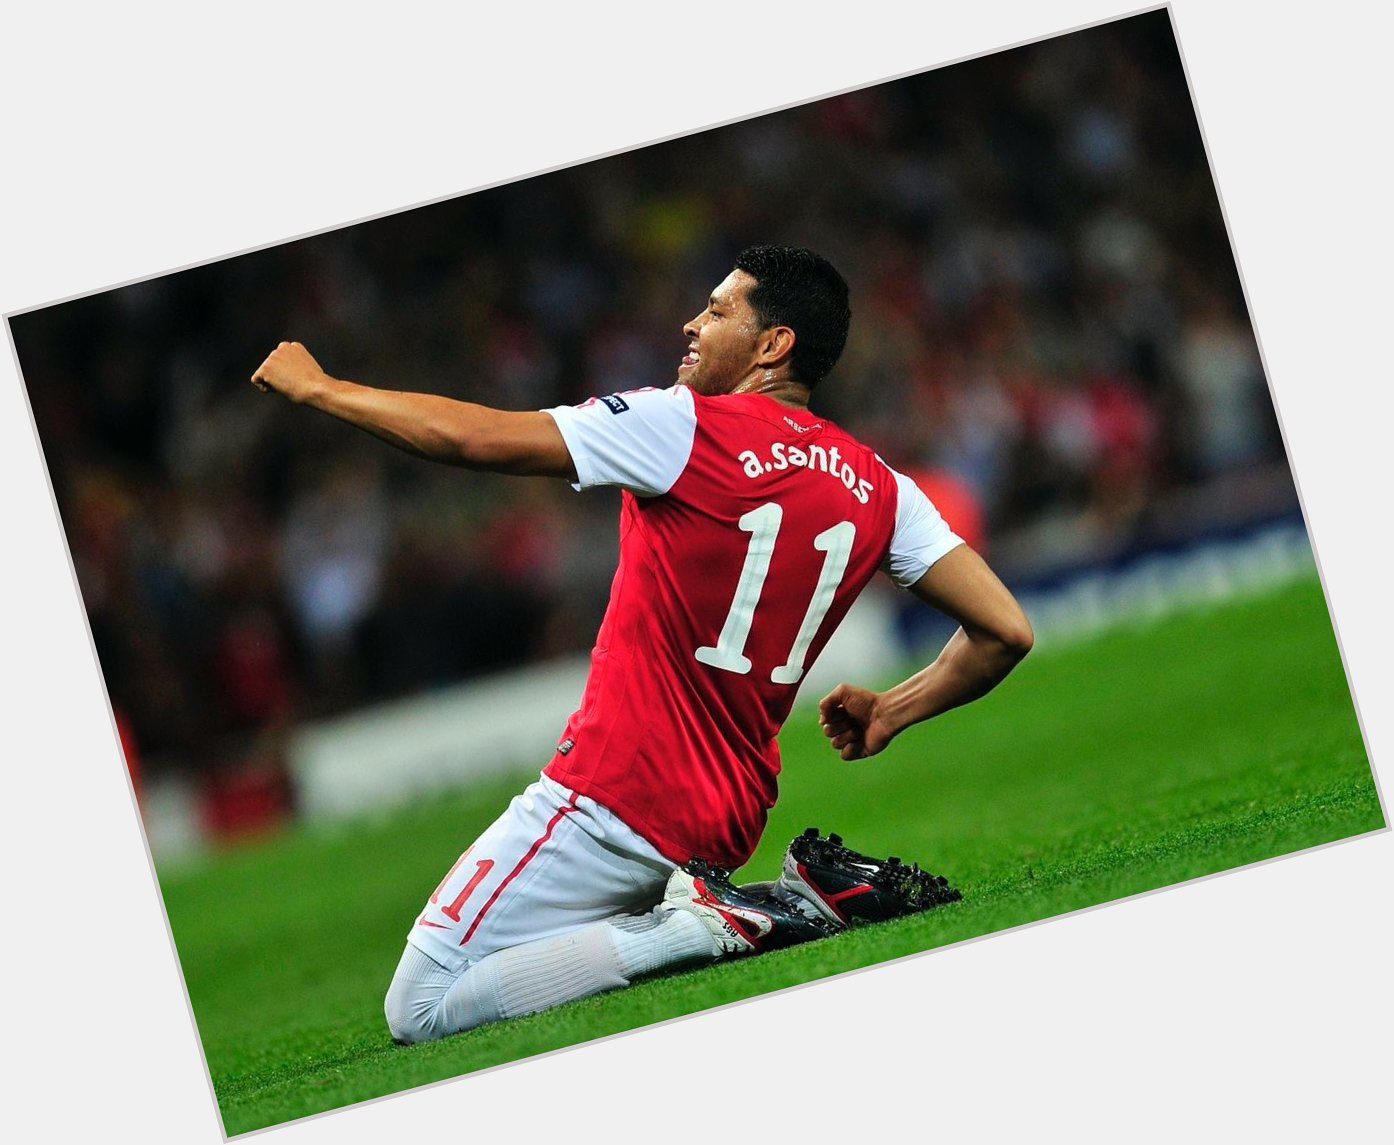 Happy Birthday to former Arsenal defender Andre Santos, who turns 35 today! 